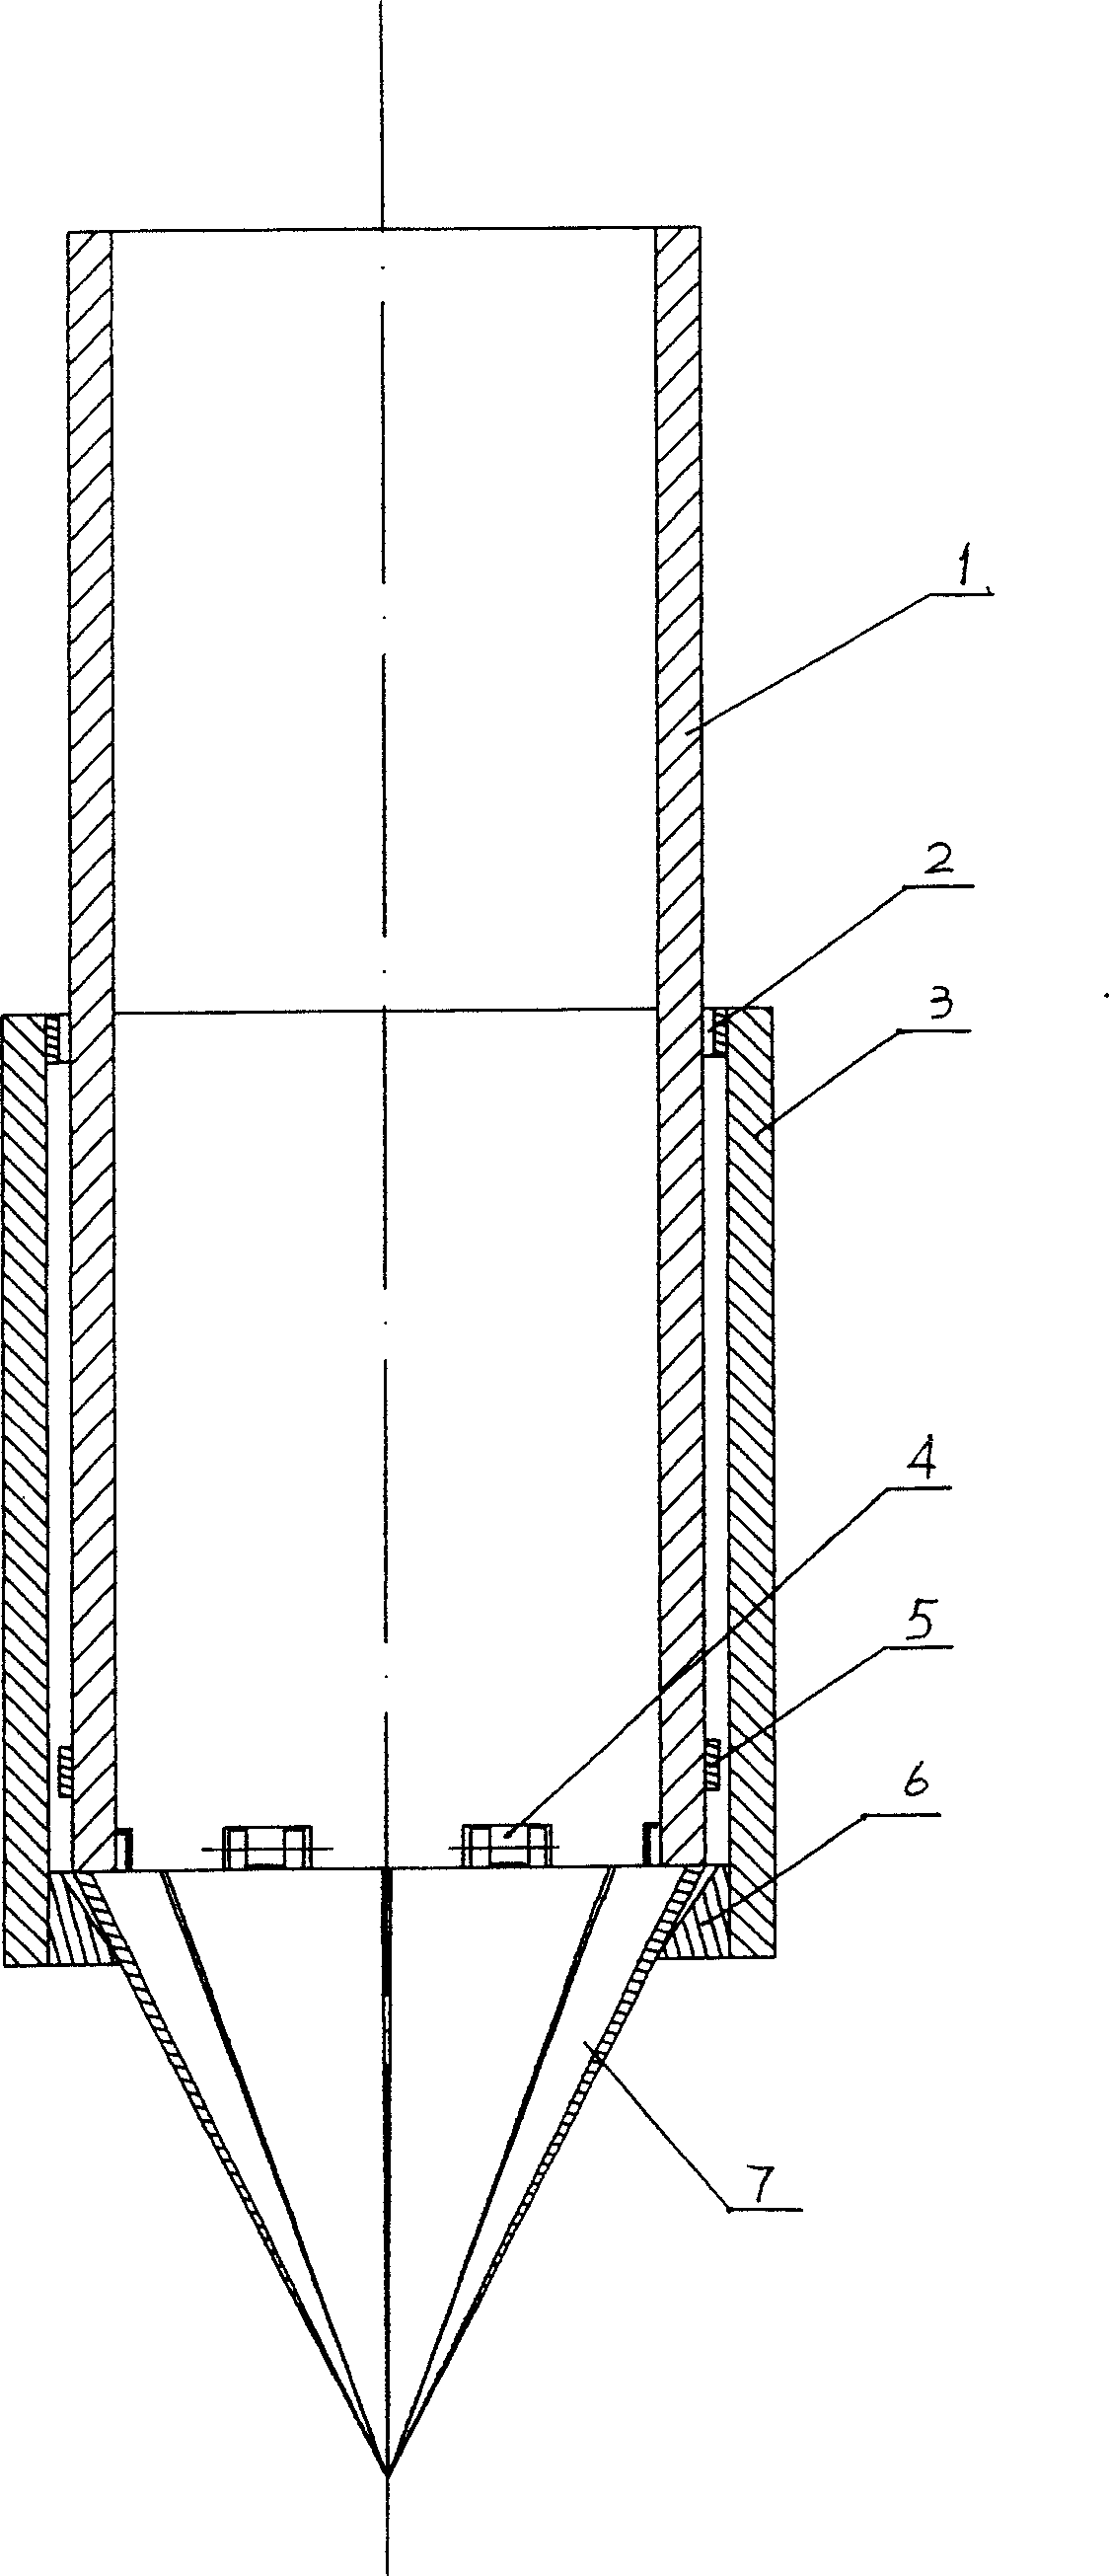 Self-experiencing expansion pile shoe and immersed tube poured pile re-piling method